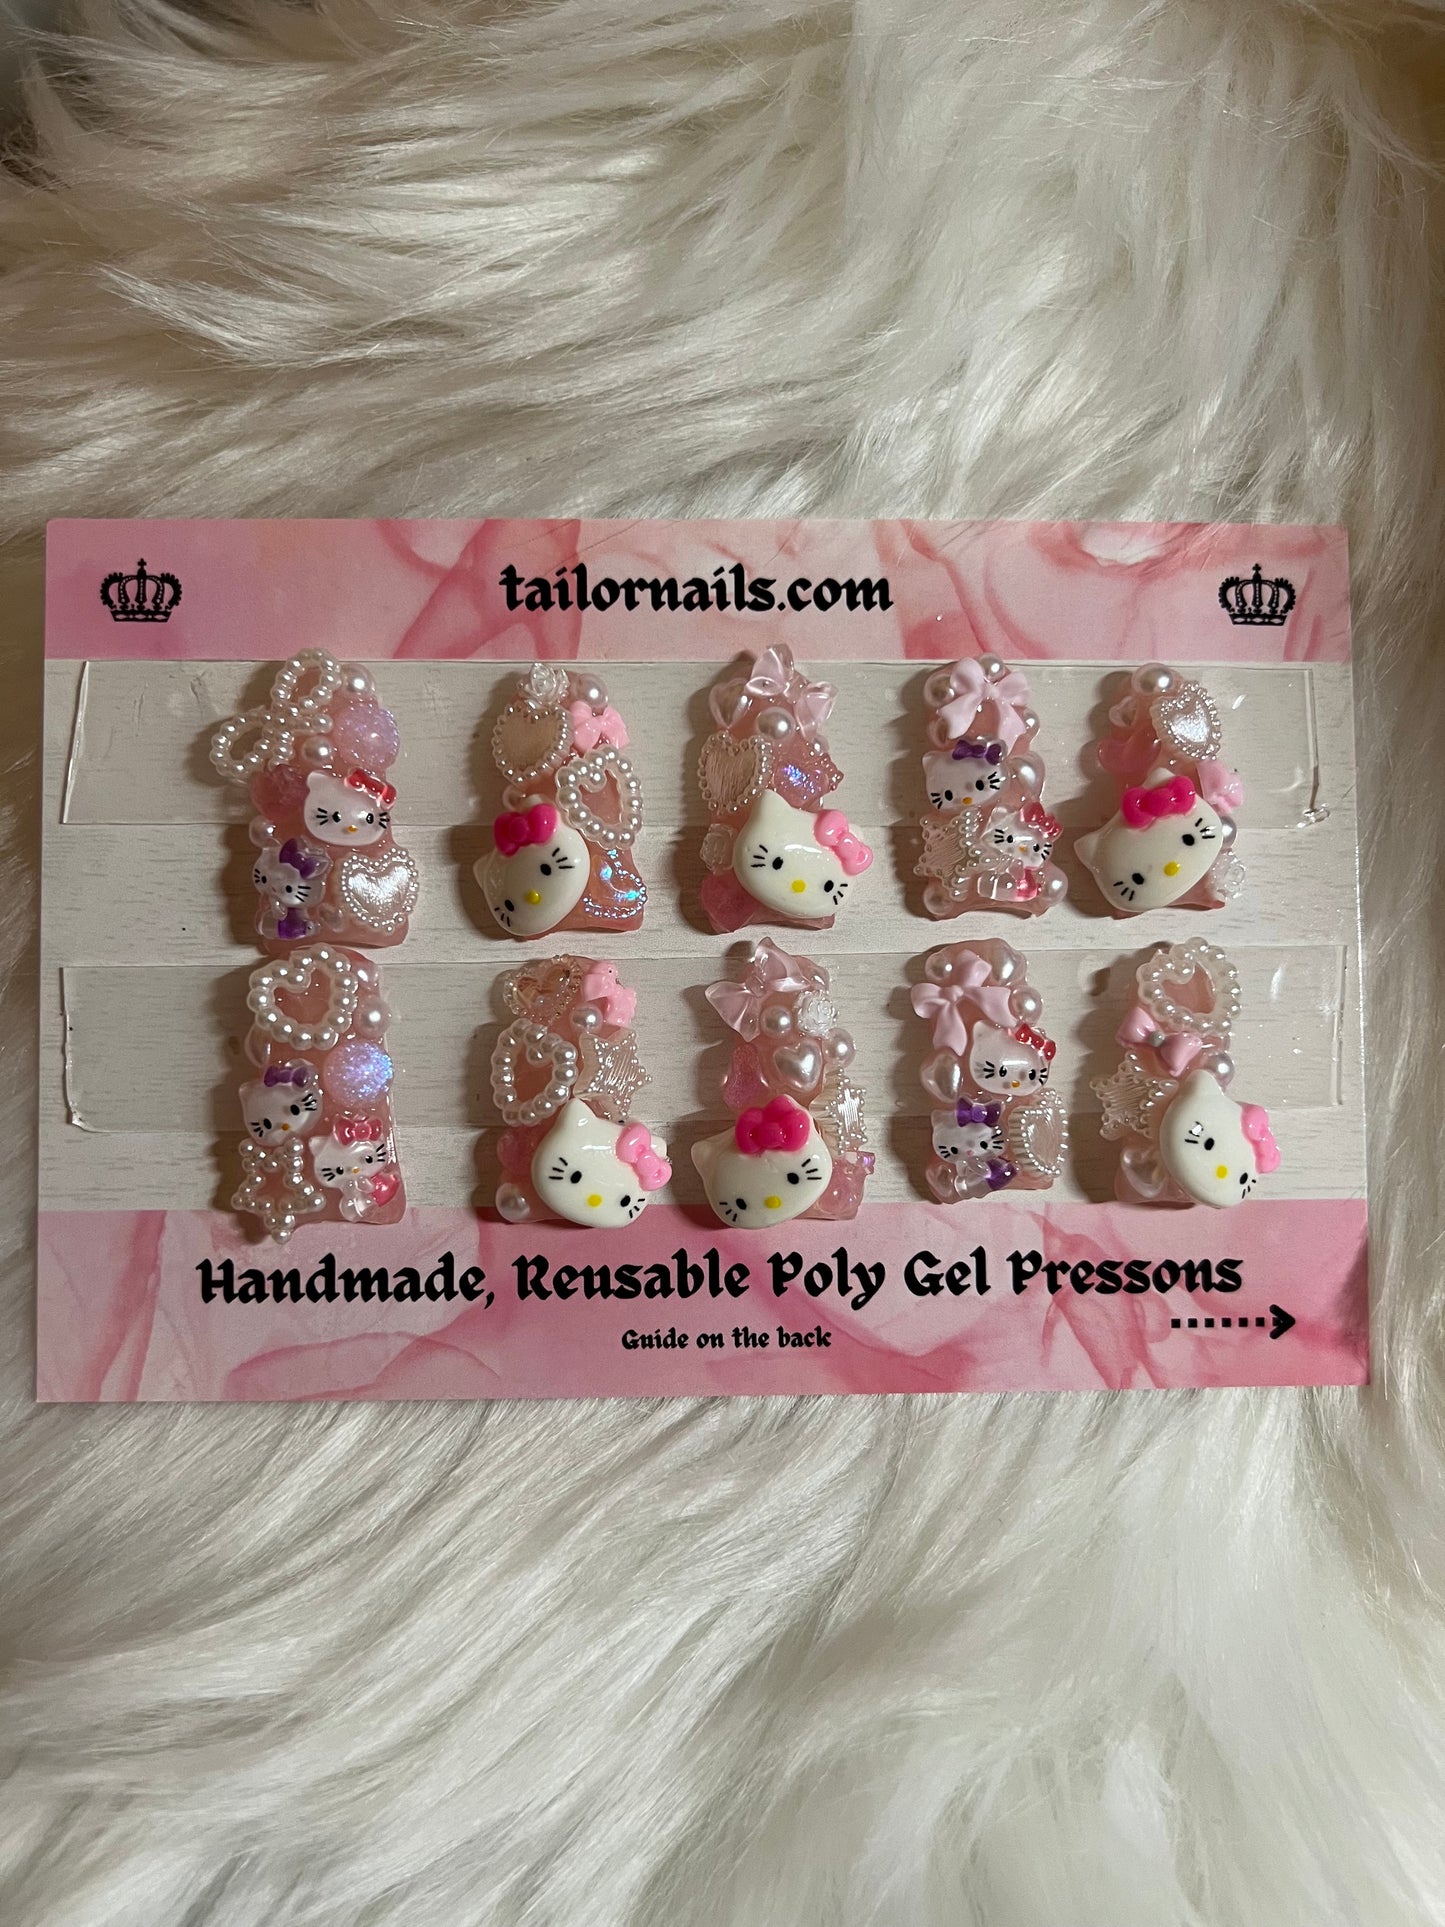 Sanrio Kawaii Junk Charm Nails (white or black) Size Required